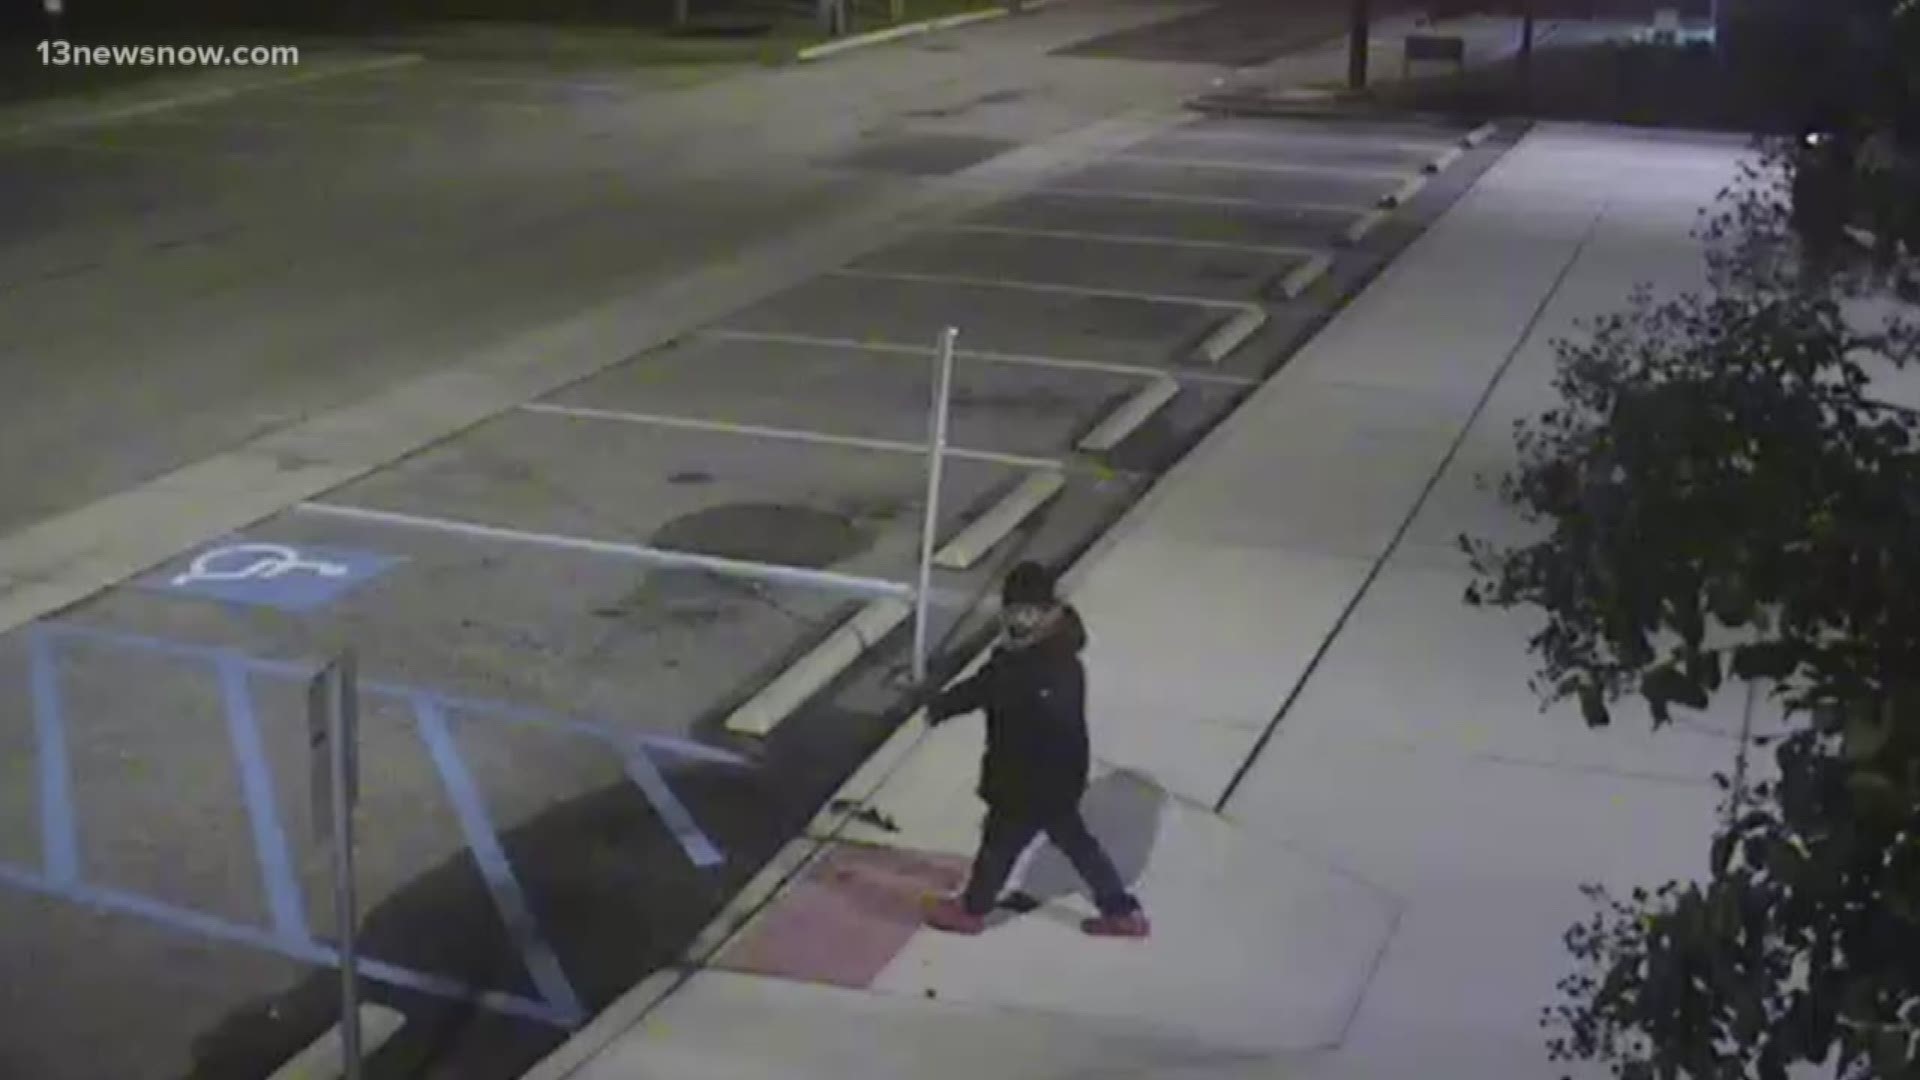 Surveillance video showed a man leaving a dog outside an animal shelter early in the morning. The animal is then seen running off on its own.